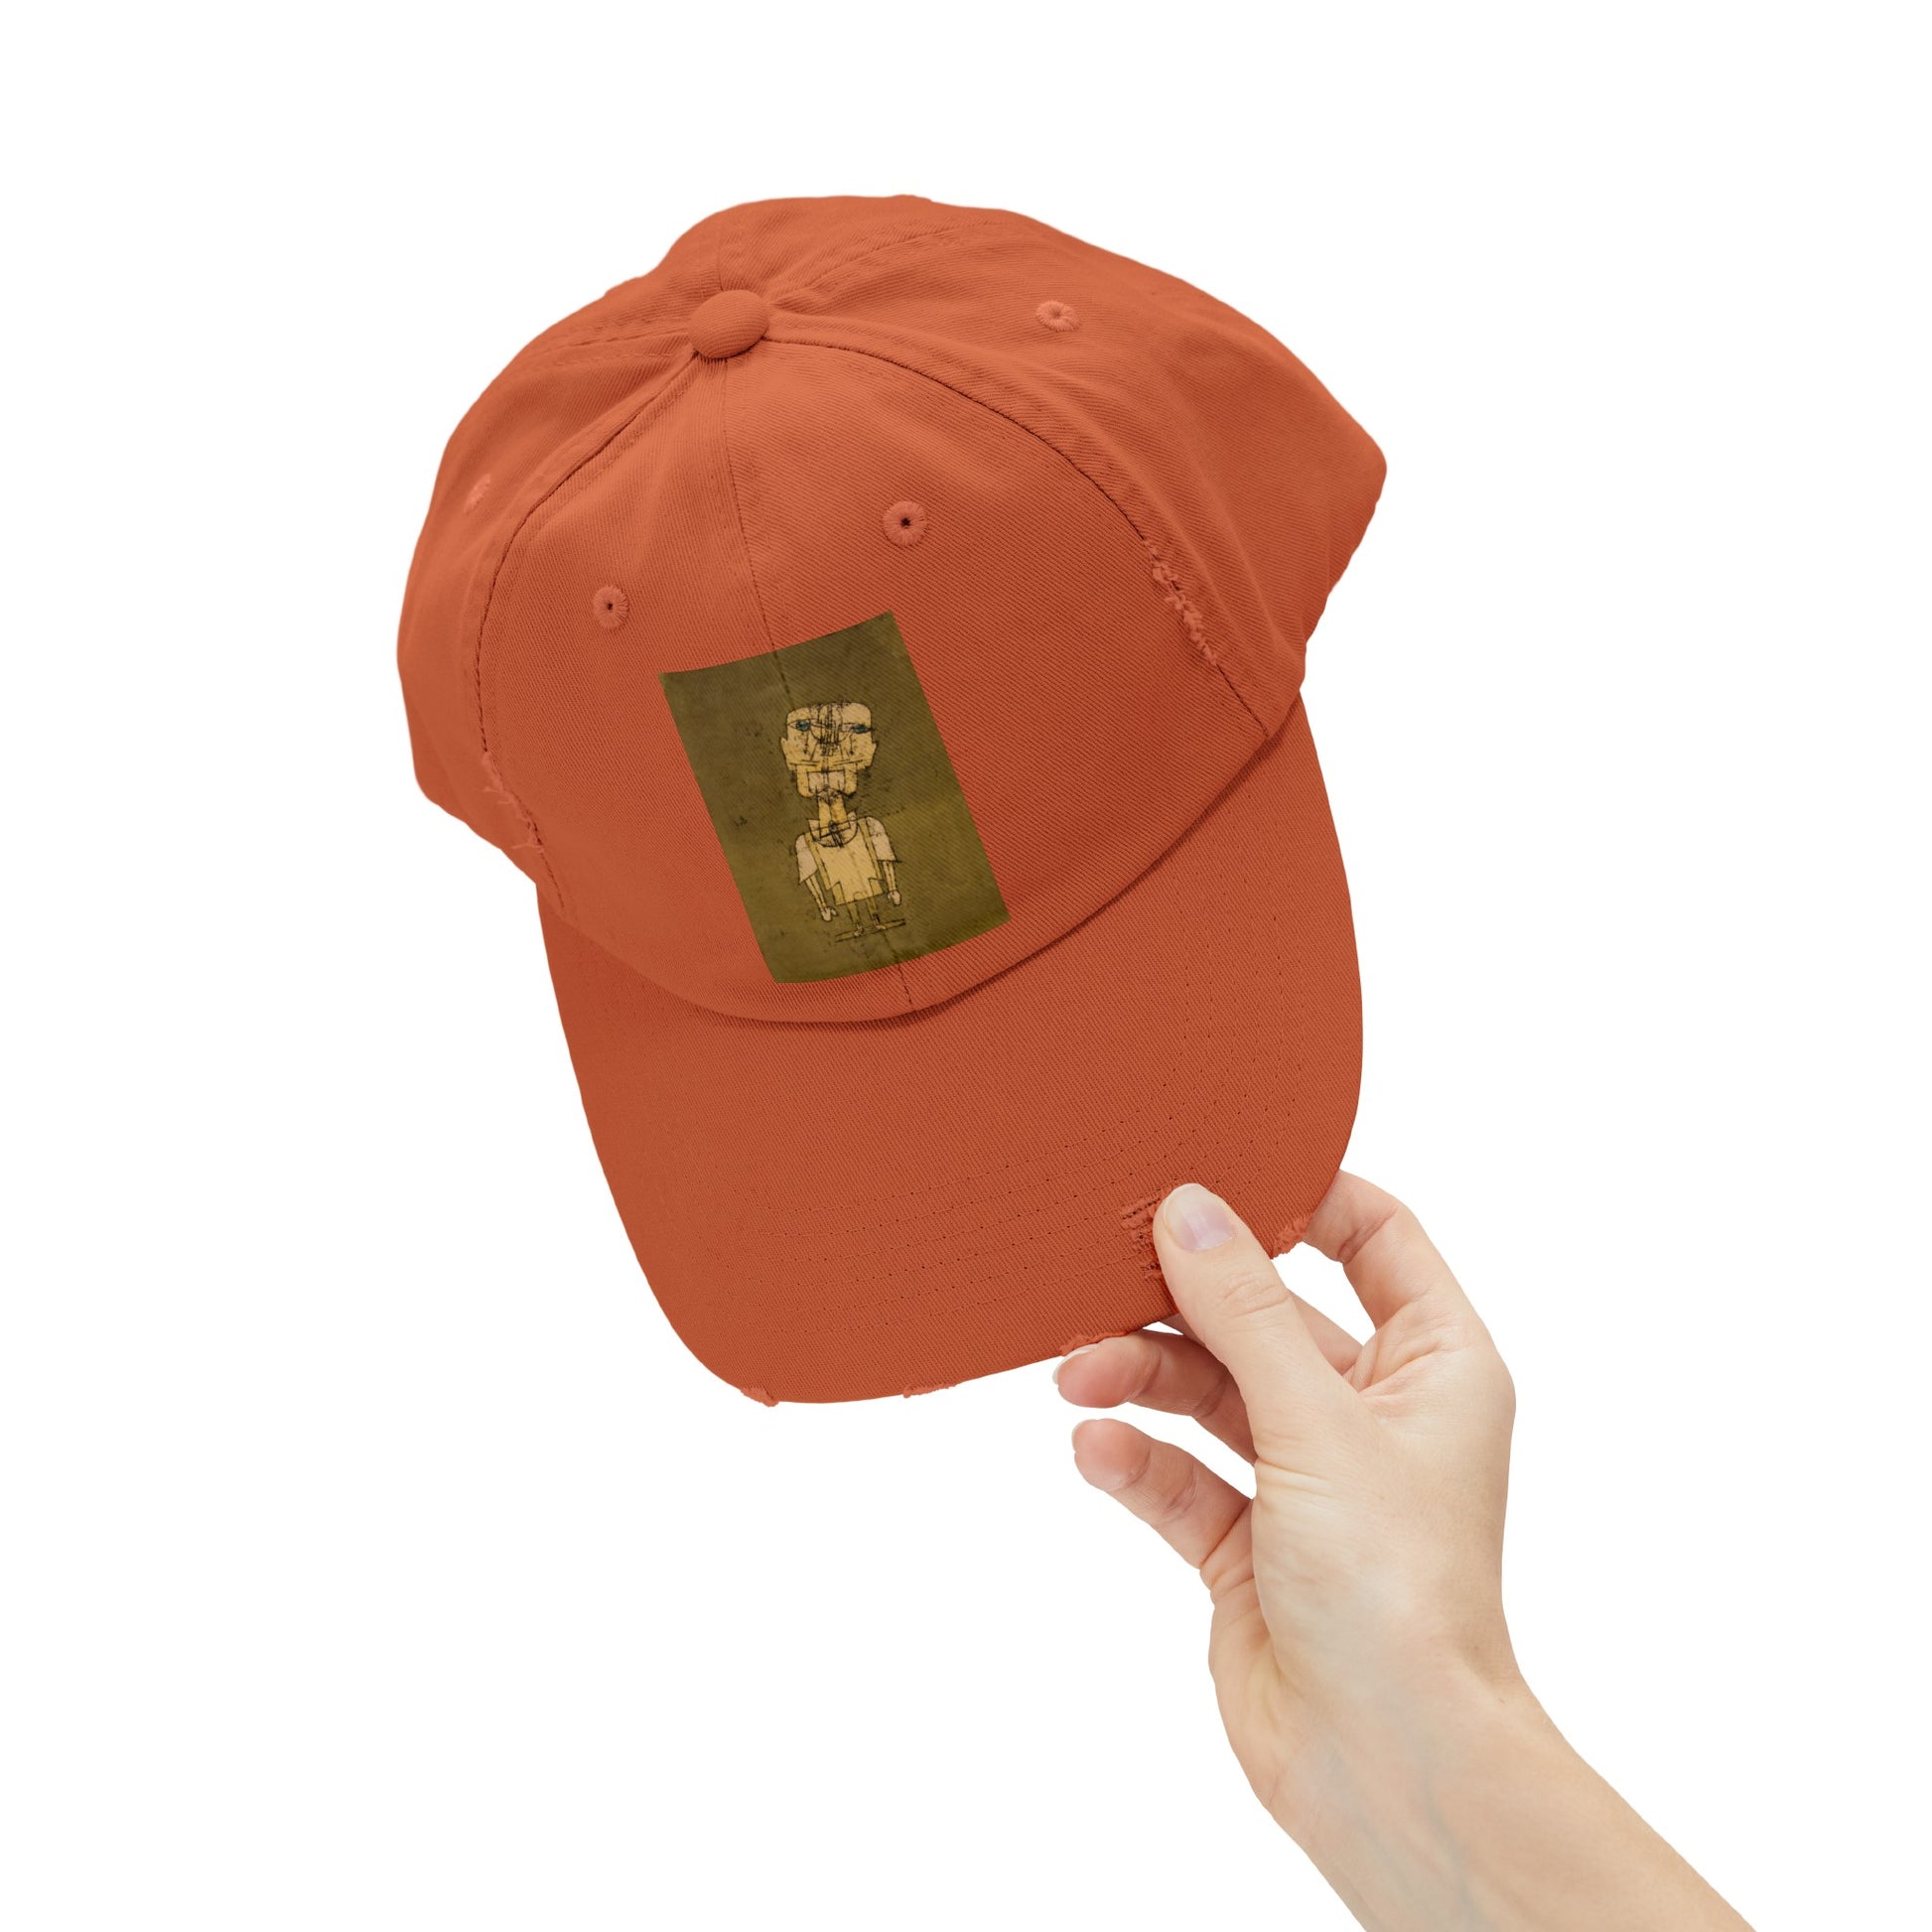 a person holding a baseball cap with a bear on it